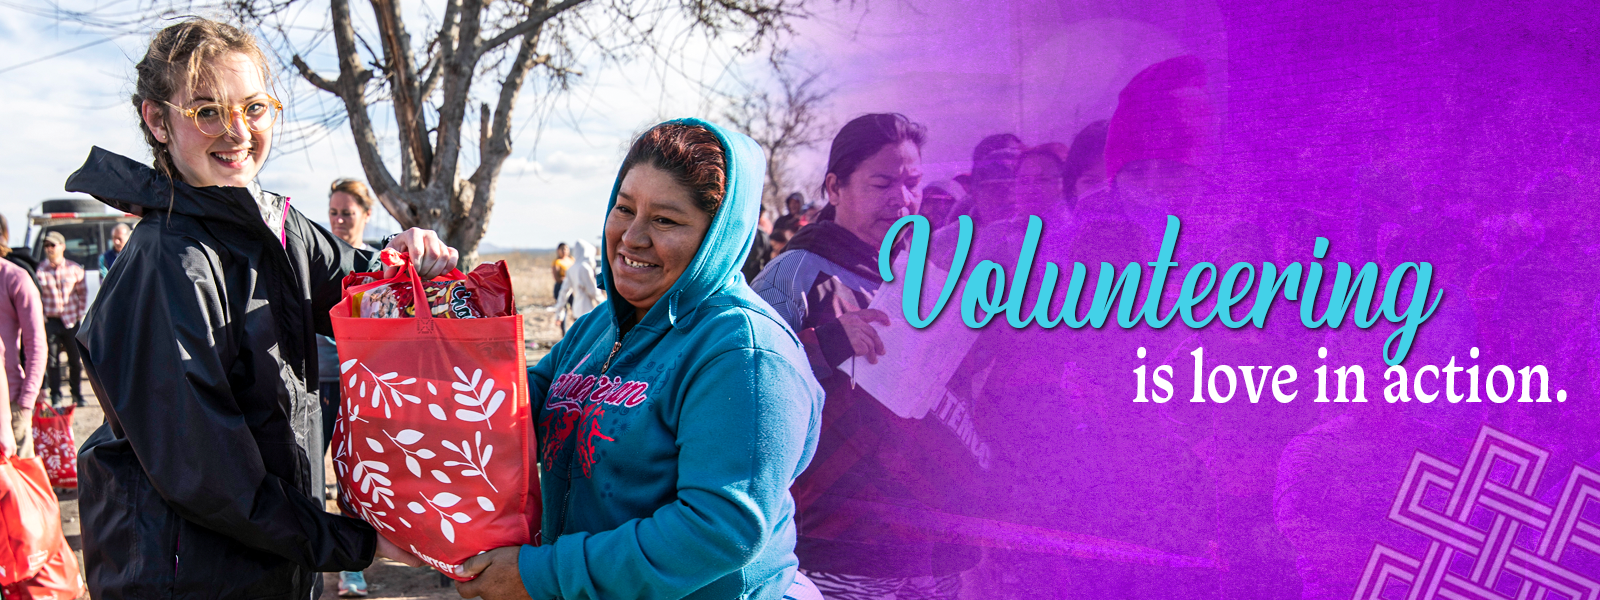 Overlaid graphical image two people on the left of the image in long sleeves holding red grocery bag. Right side overlaid with purple and reads "Volunteering is love in action"